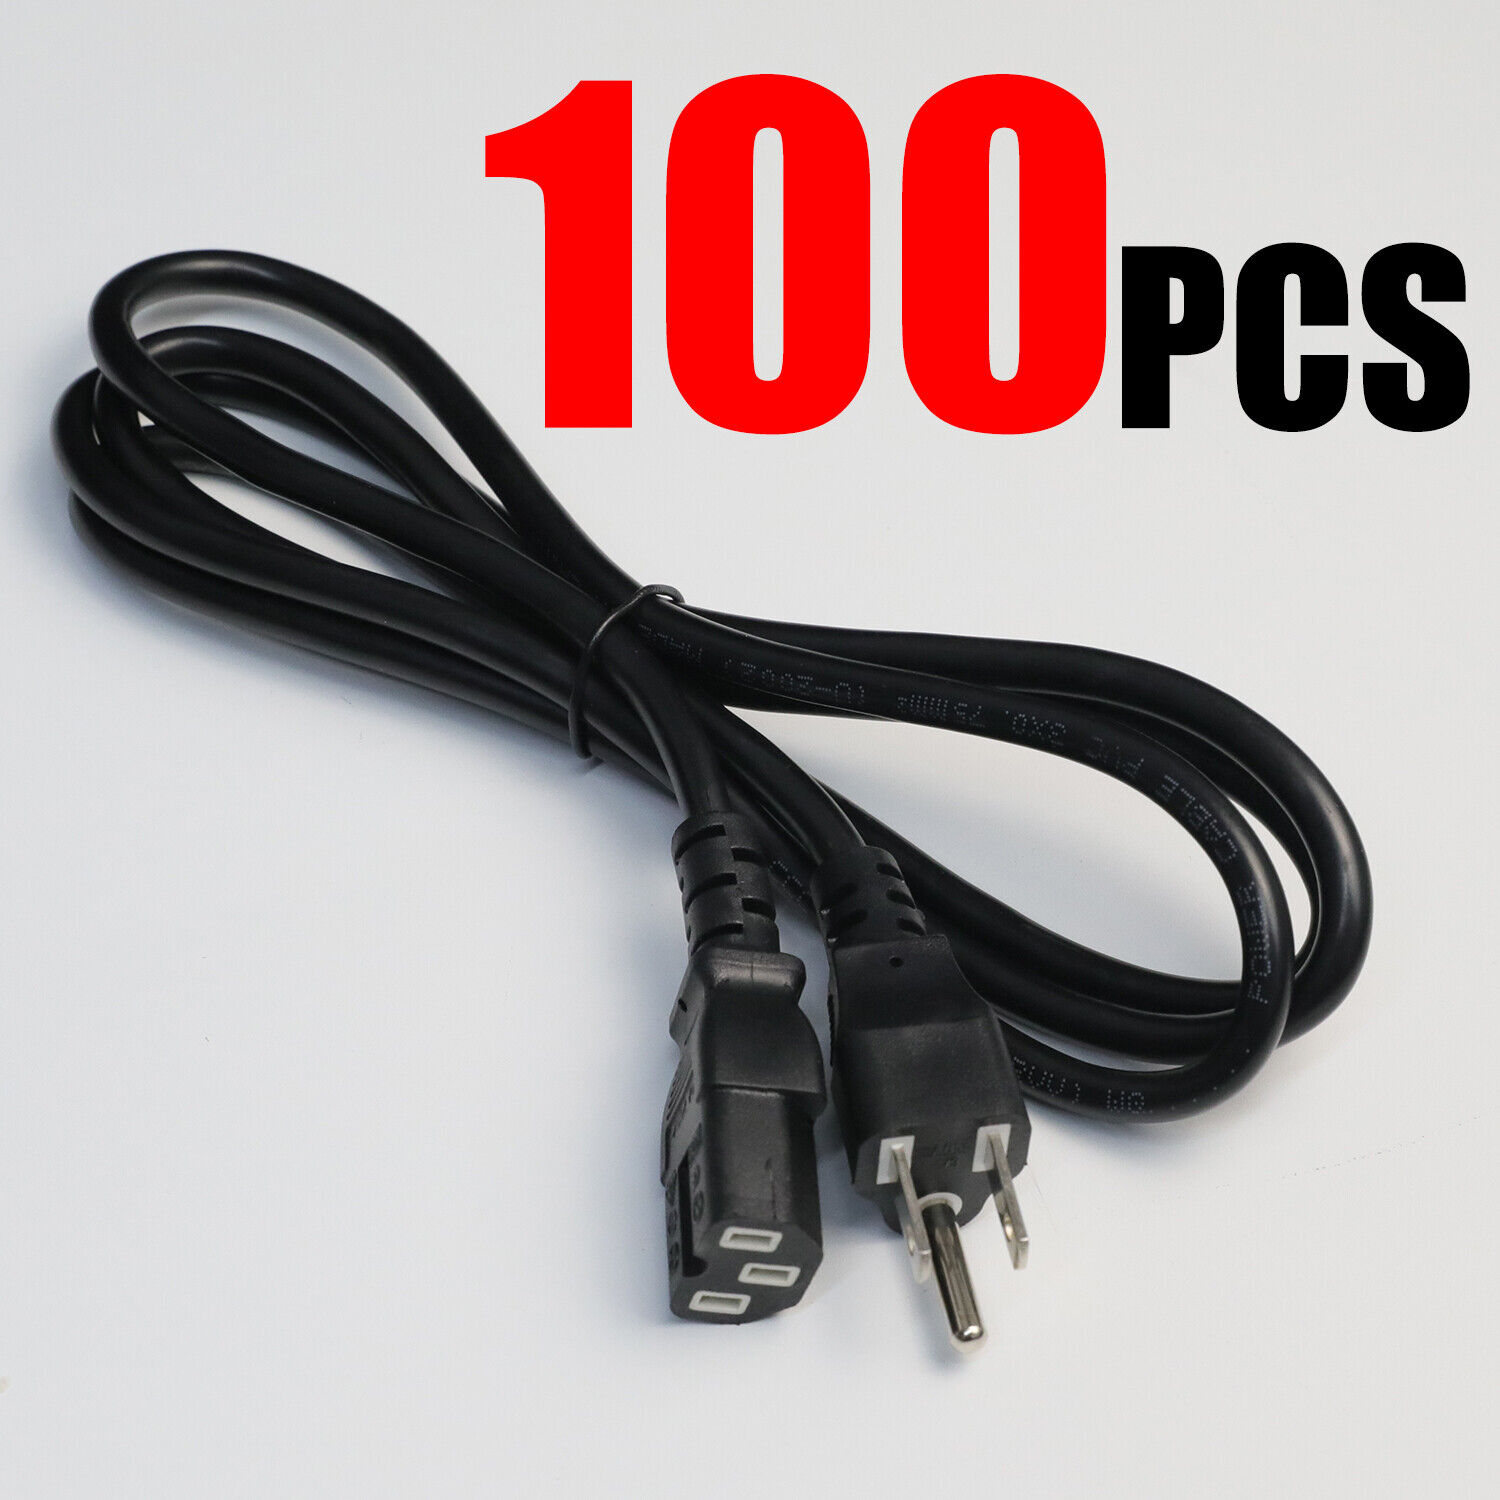 100 LOT AC Power Cord Cable Desktop Monitor Computer 6ft PC Printers